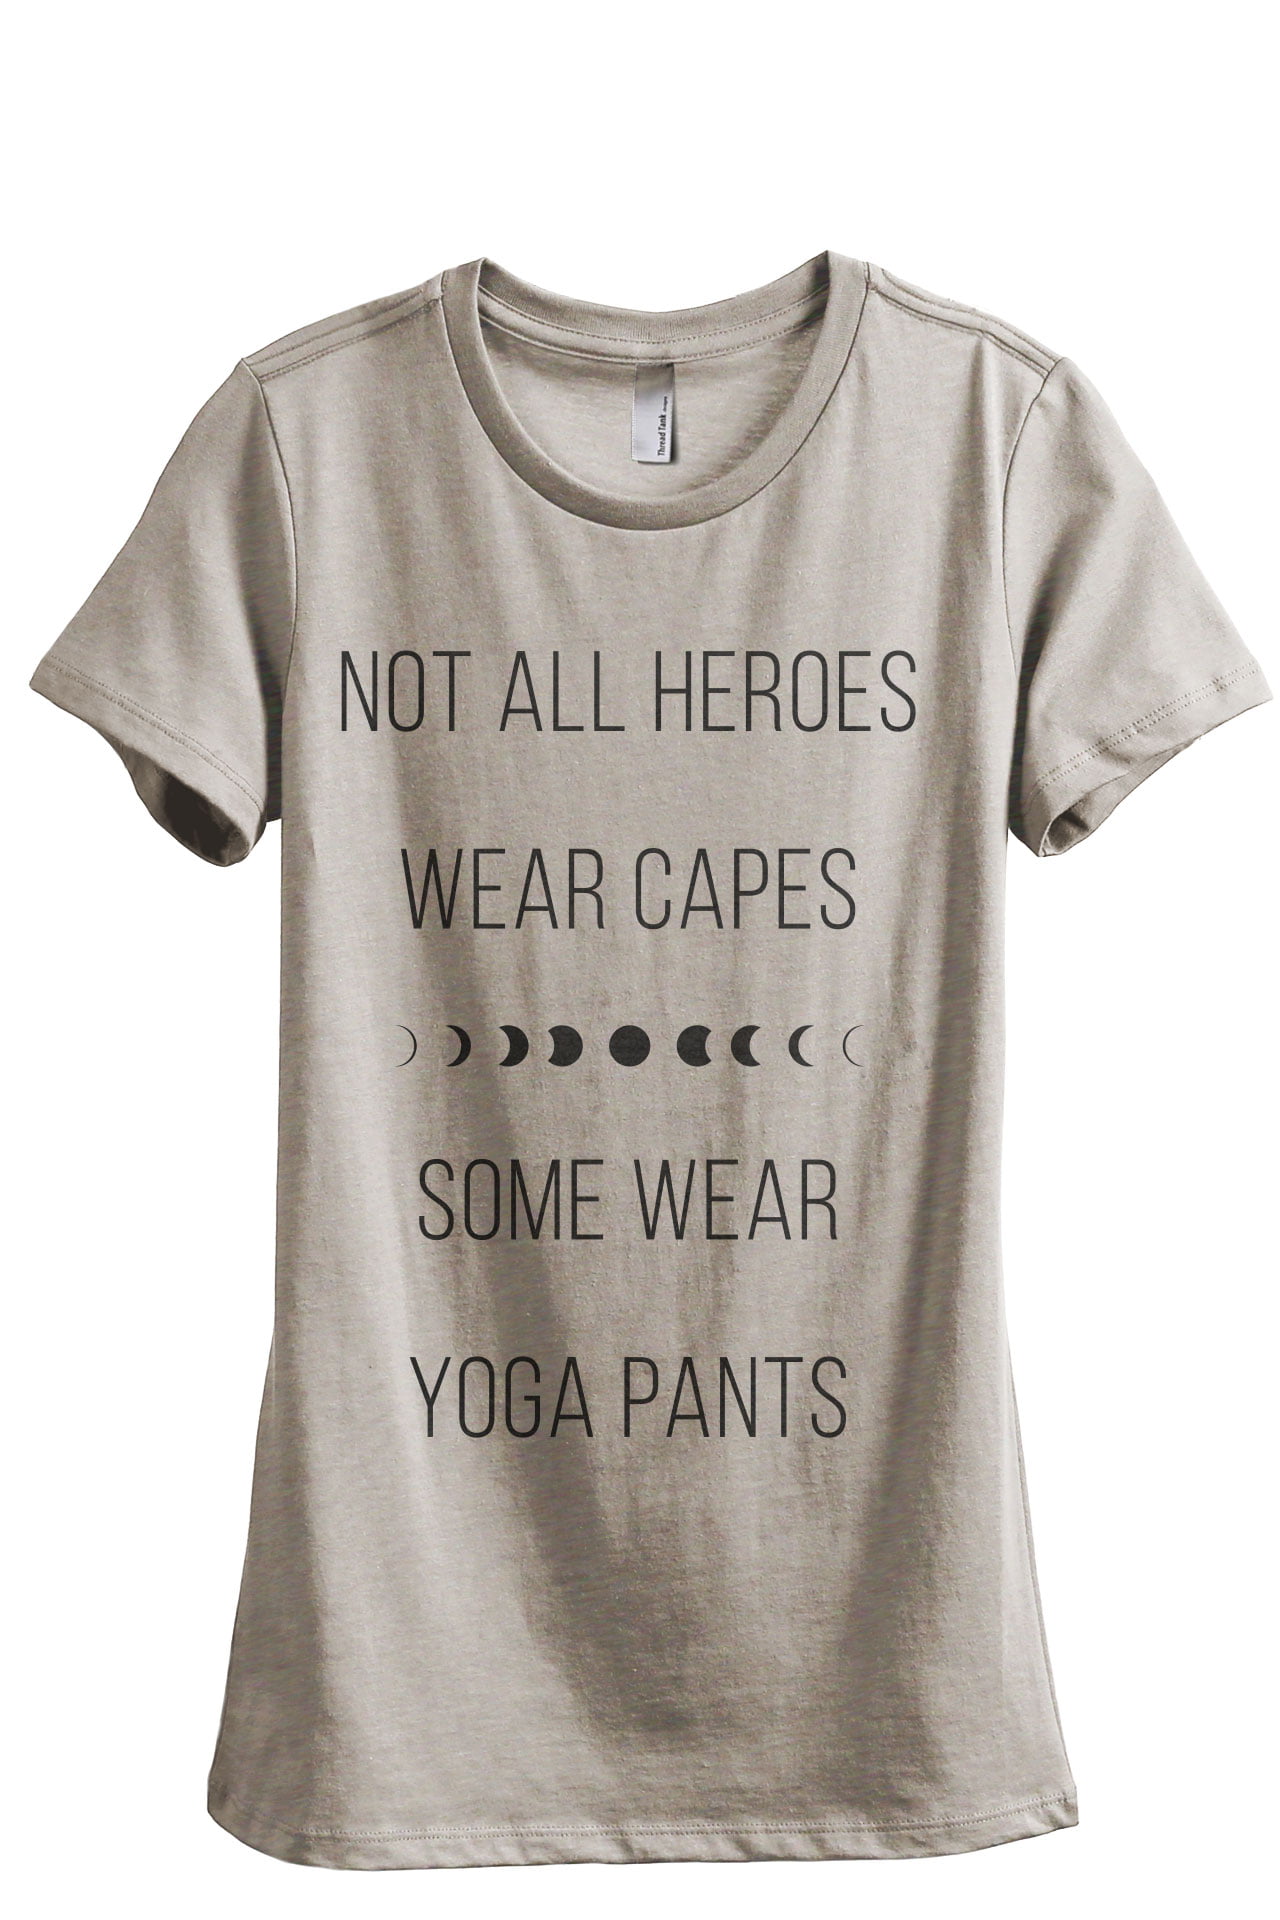 Not All Heroes Wear Capes Some Wear Yoga Pants Women's Fashion Relaxed  T-Shirt Tee Heather Tan Large